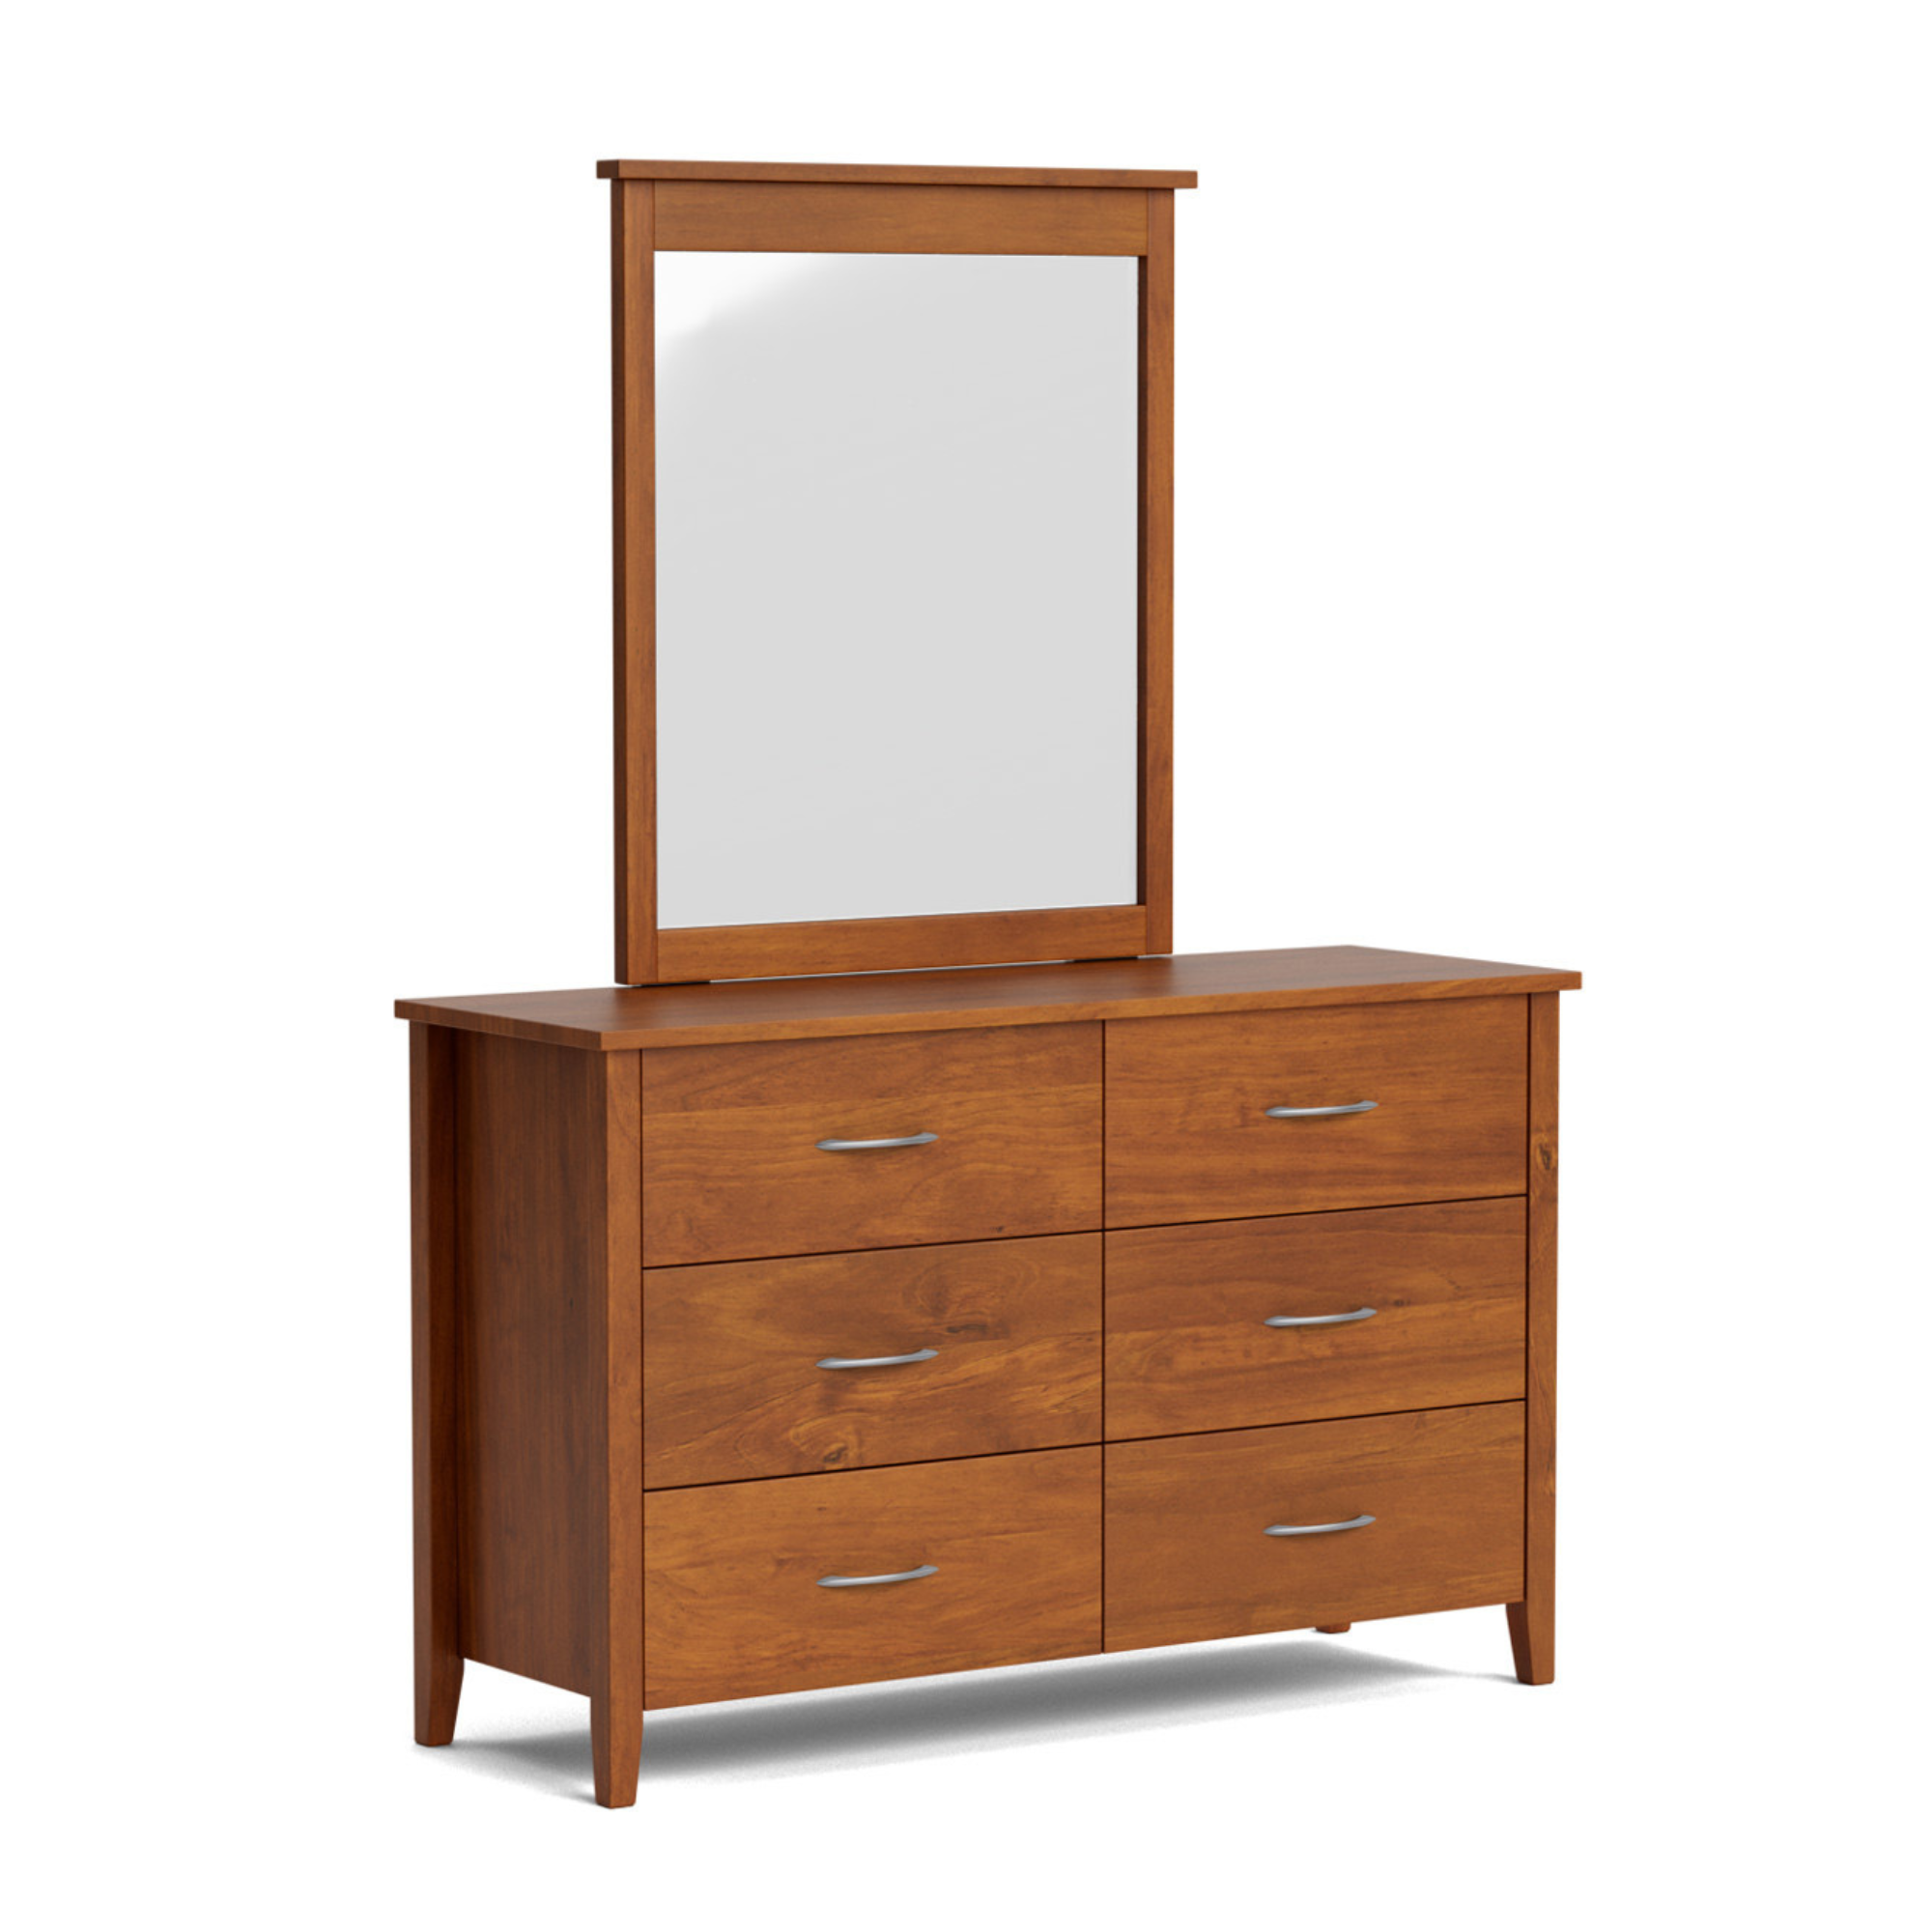 IVYDALE 6 DRAWER DUCHESS WITH MIRROR | PINE OR AMERICAN ASH | NZ MADE